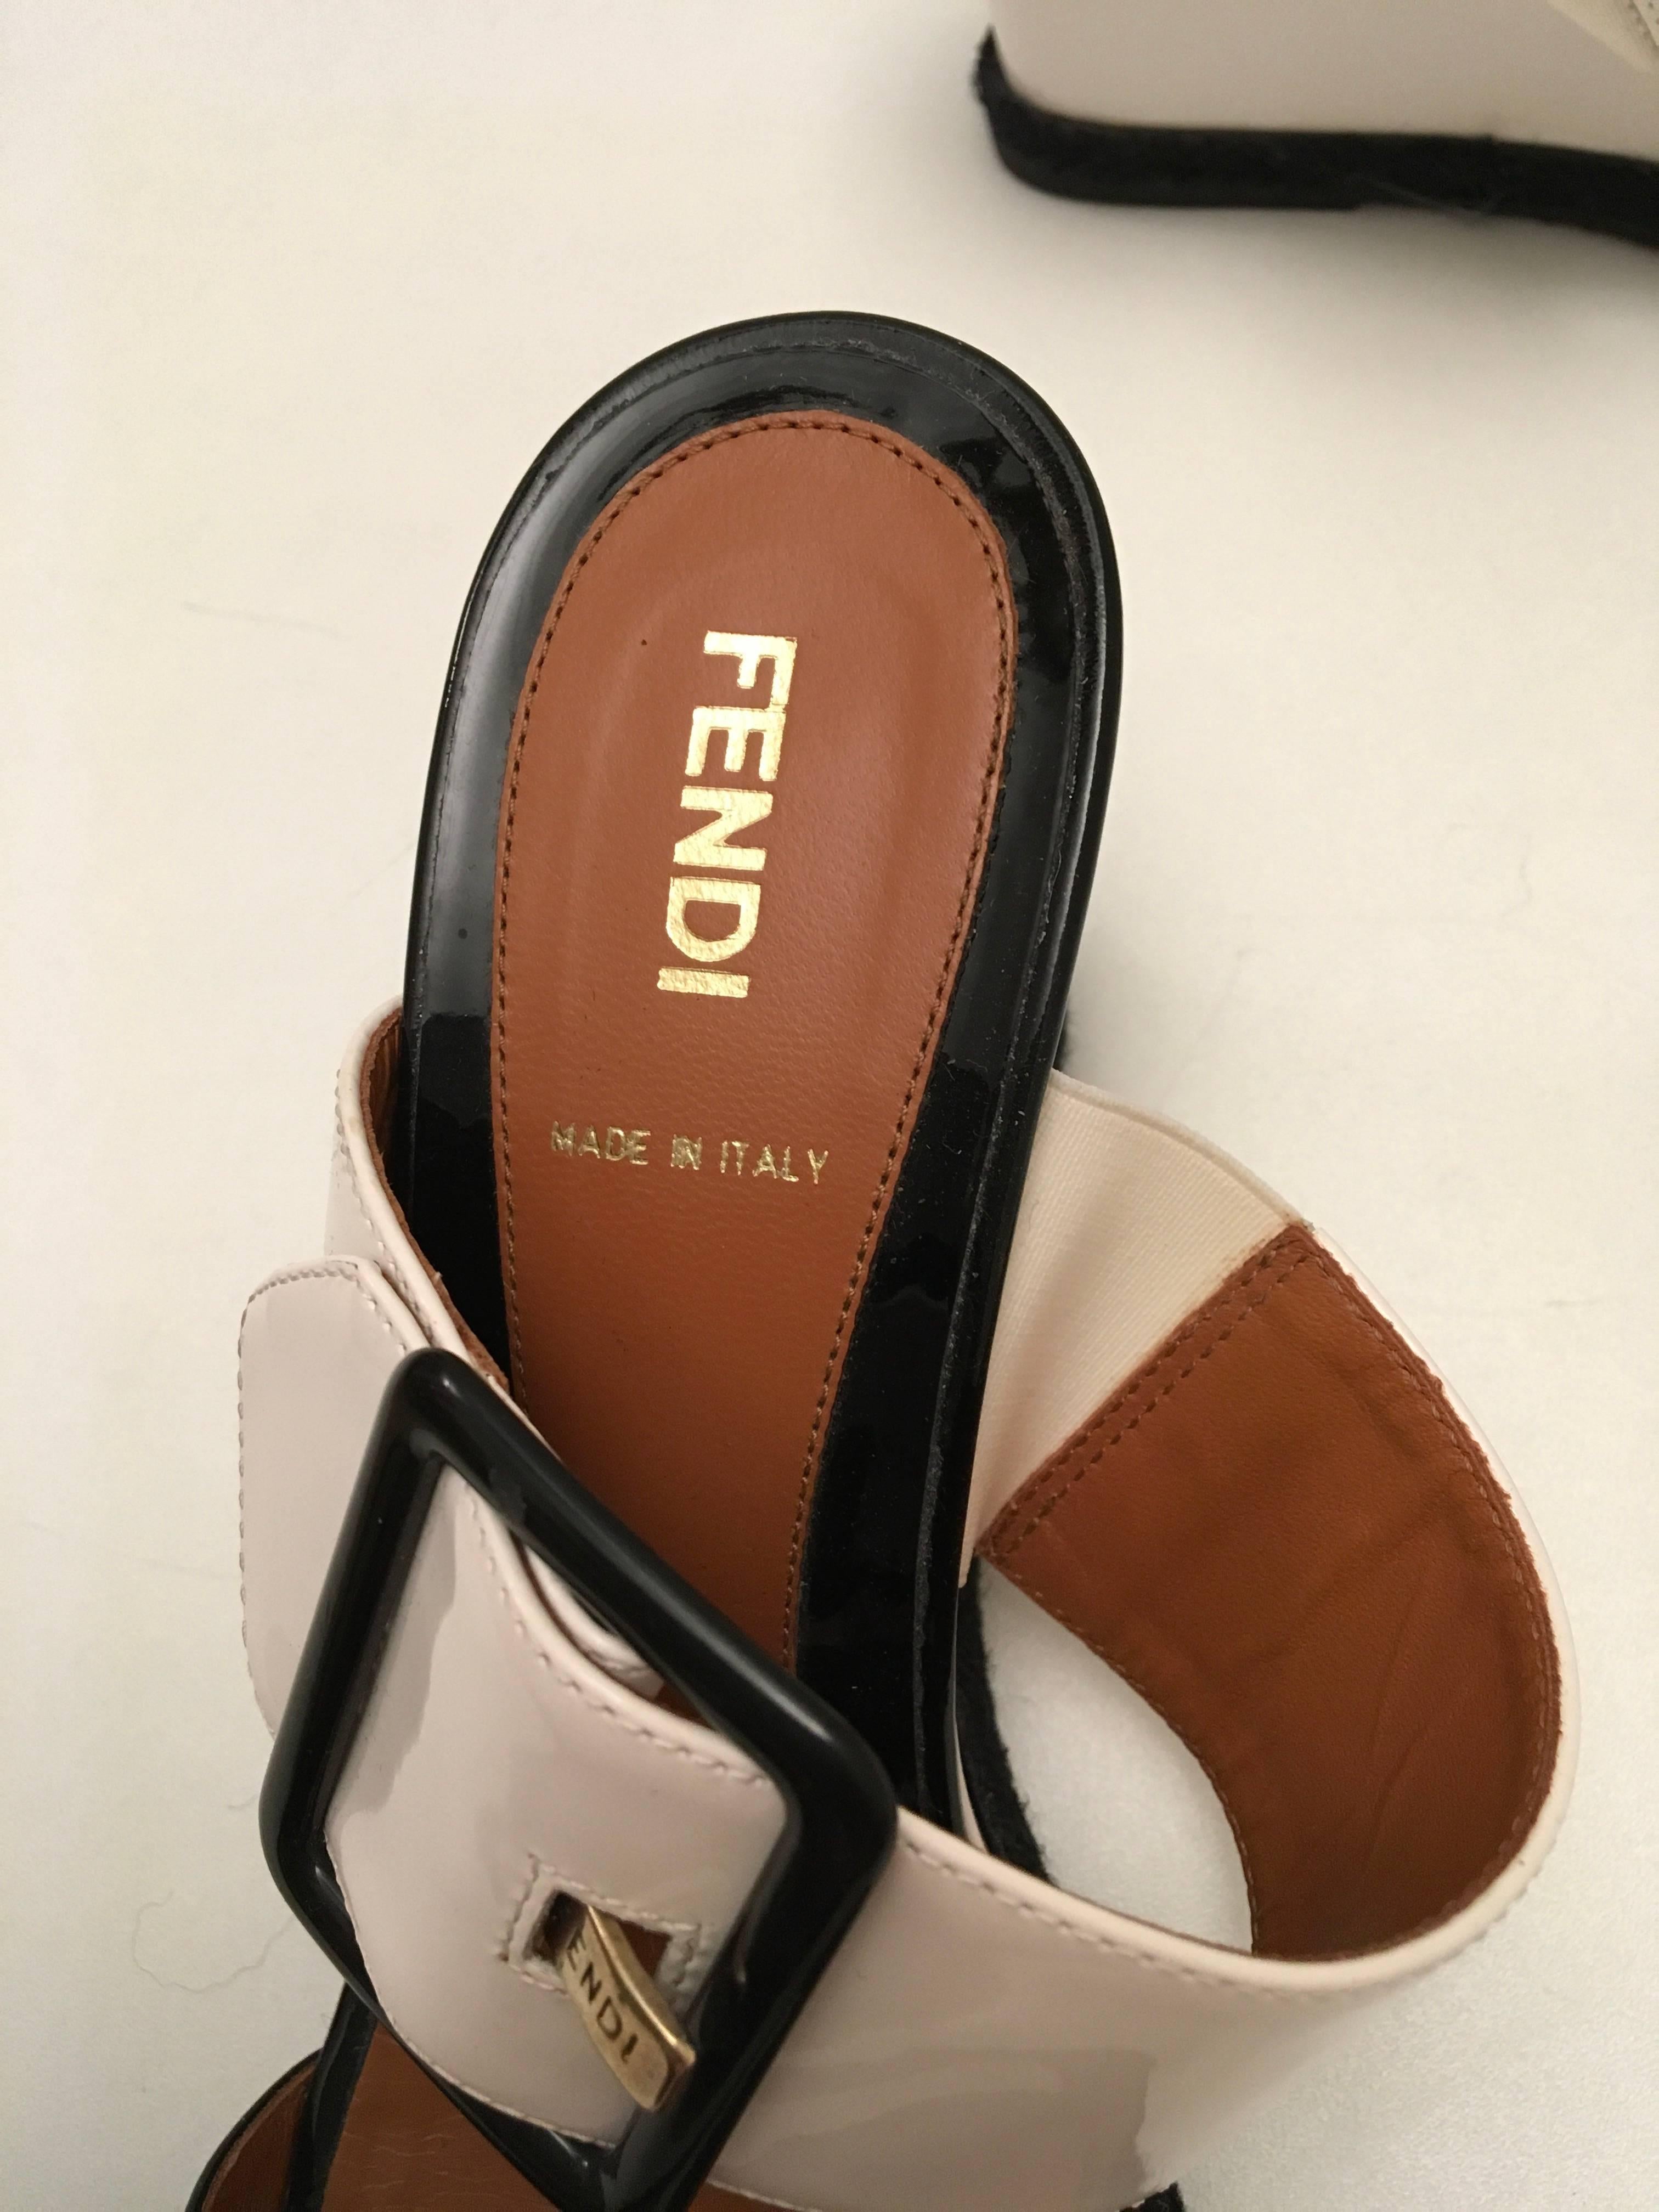 Fendi Patent Leather Wedges - Black and White - Size 37.5 For Sale 3